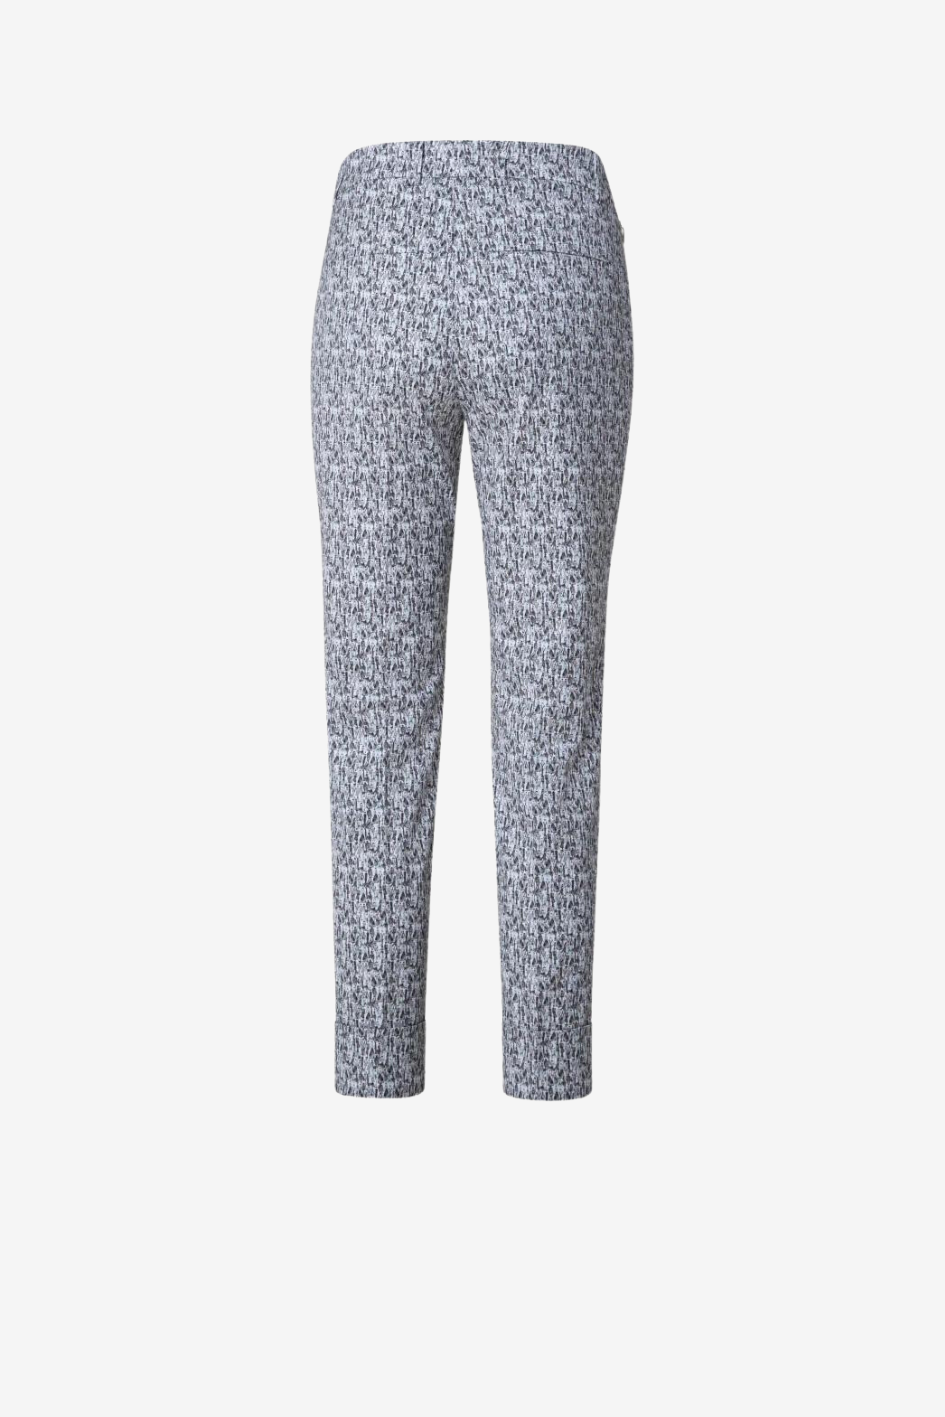 Croquis Print Cotton Stretch Tapered Pants